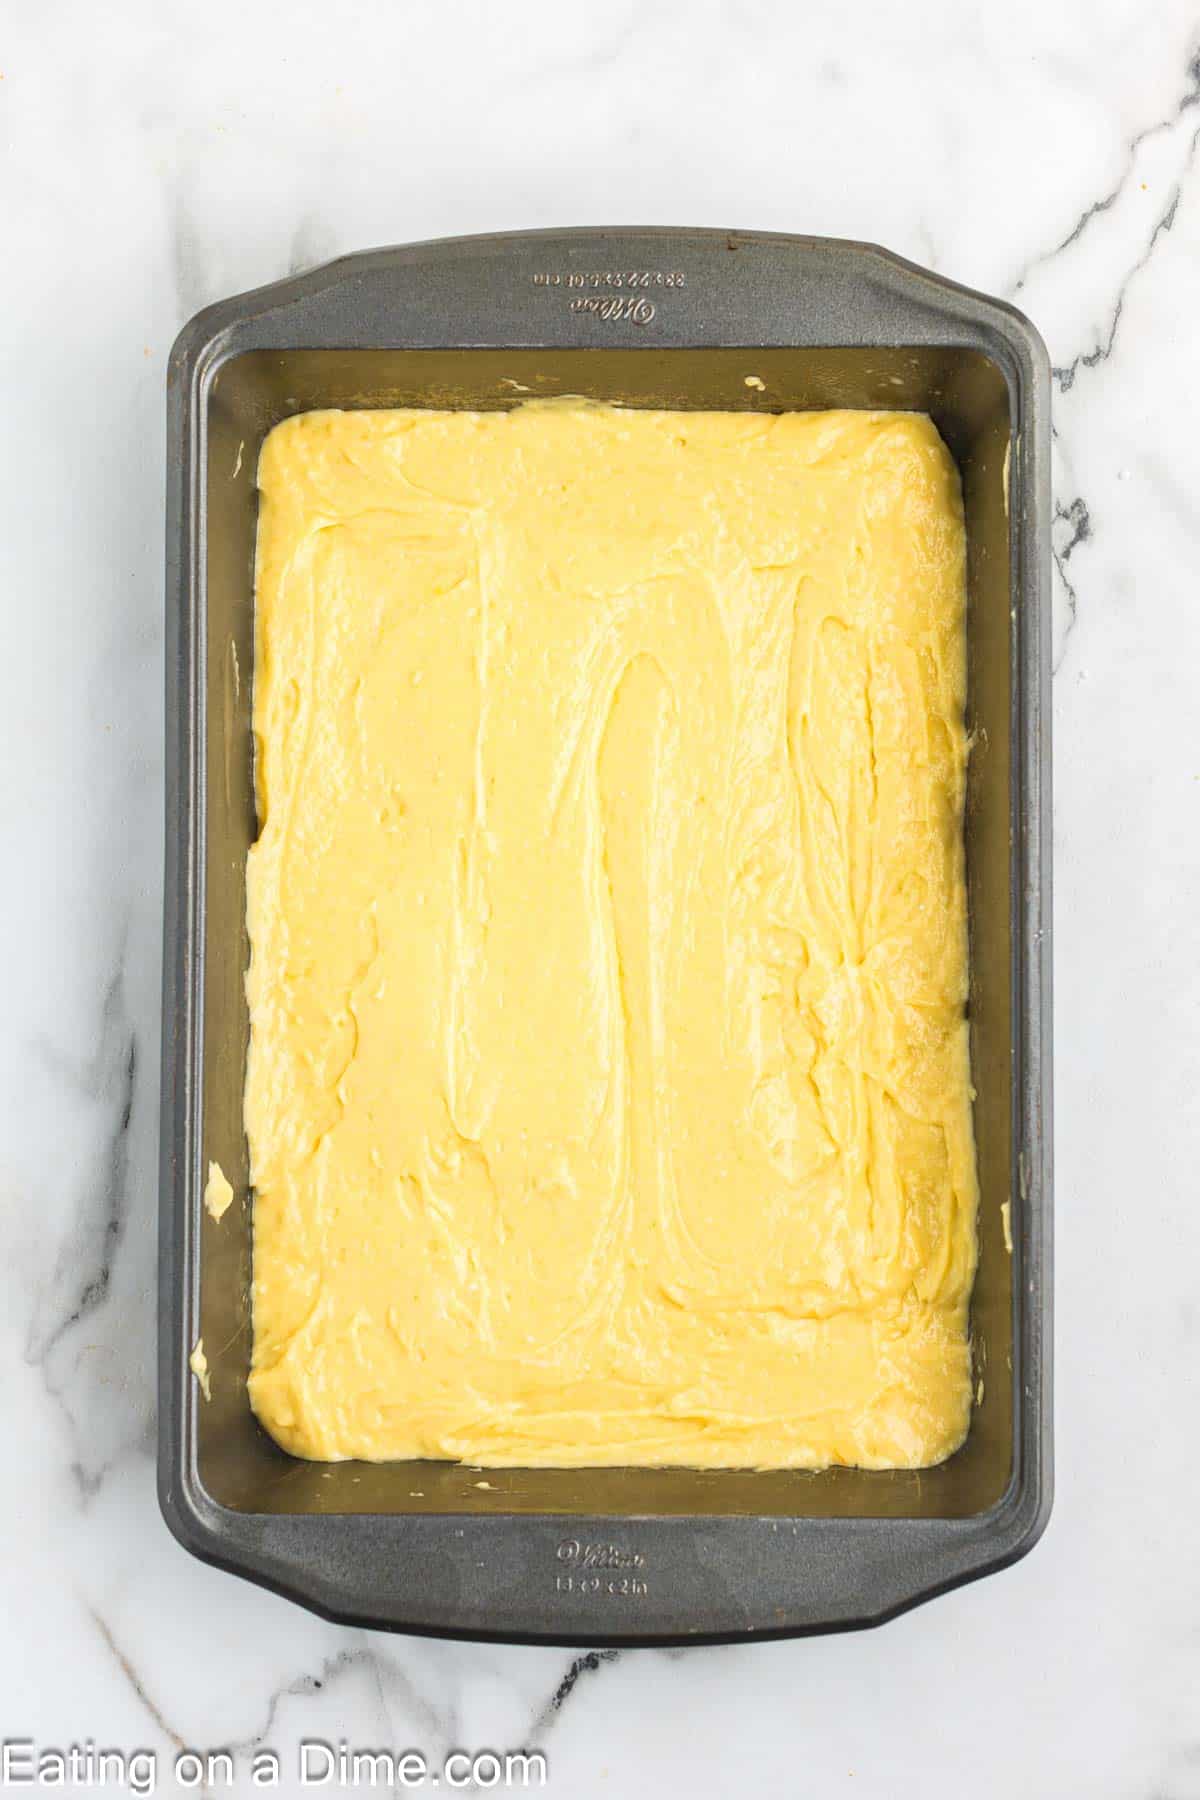 Cake batter spread in a baking dish